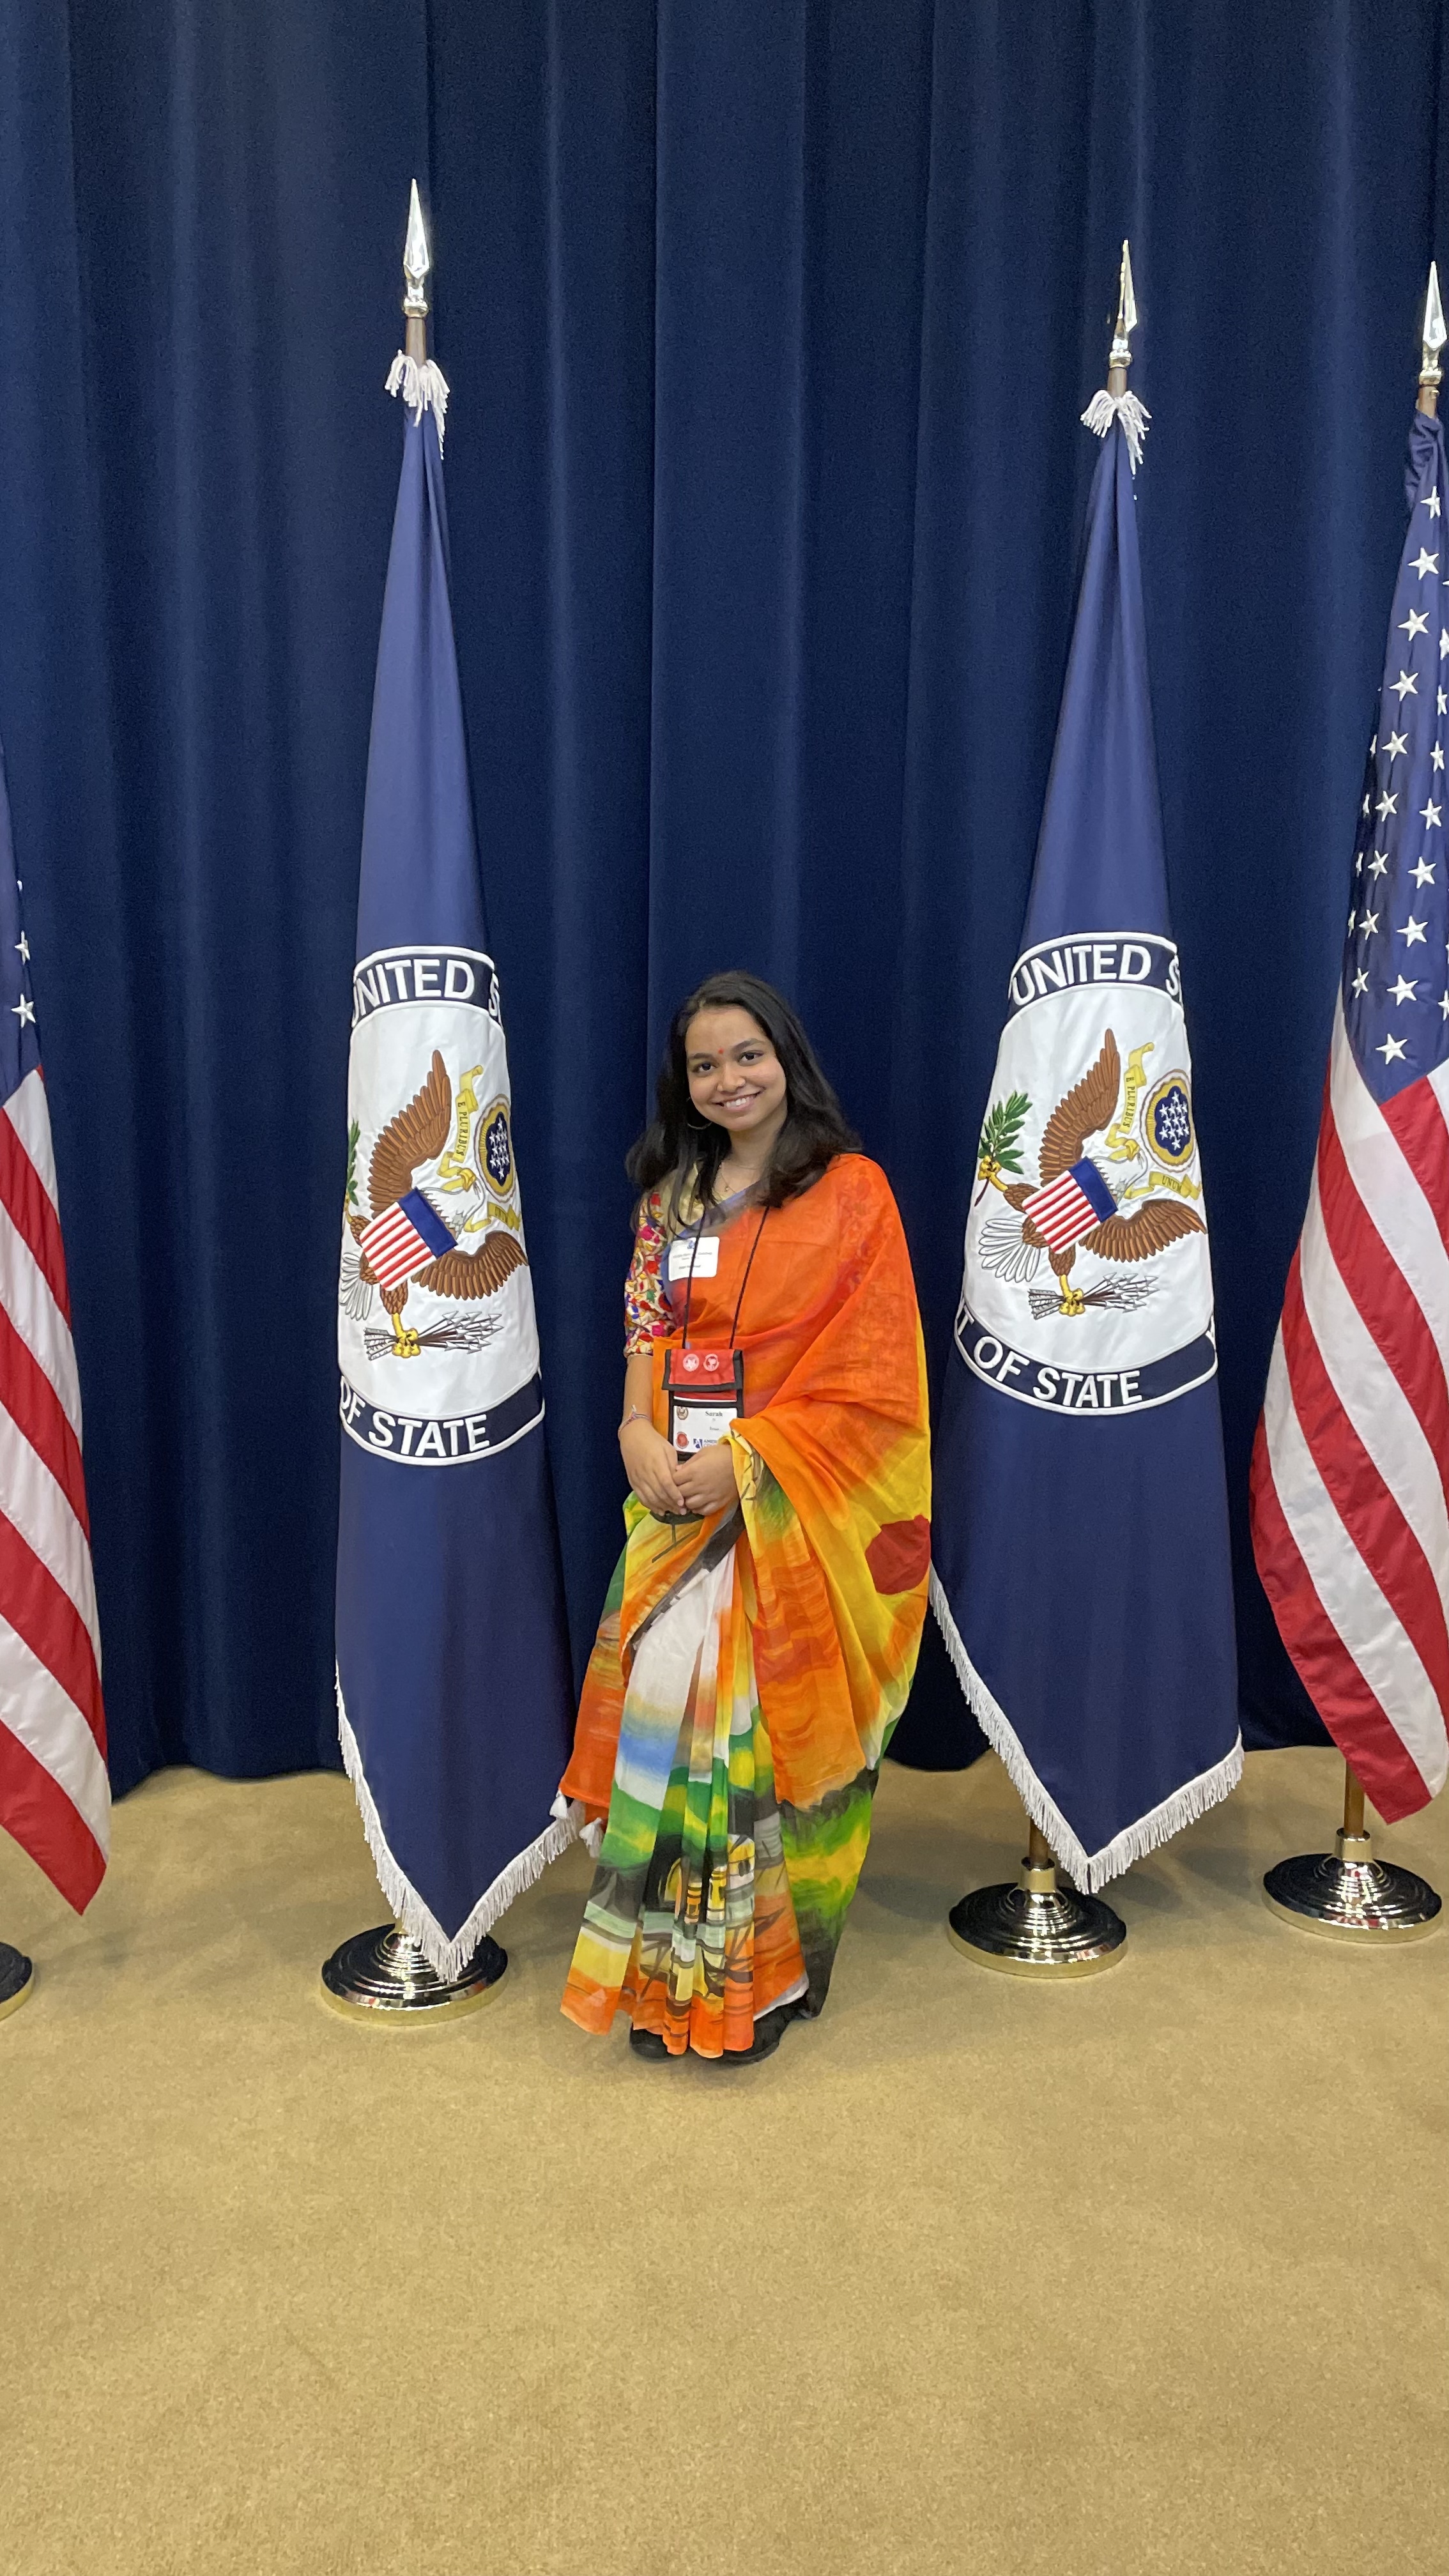 Photo Of Student In Traditional Dress Posing Between Congressional Flags Jpeg